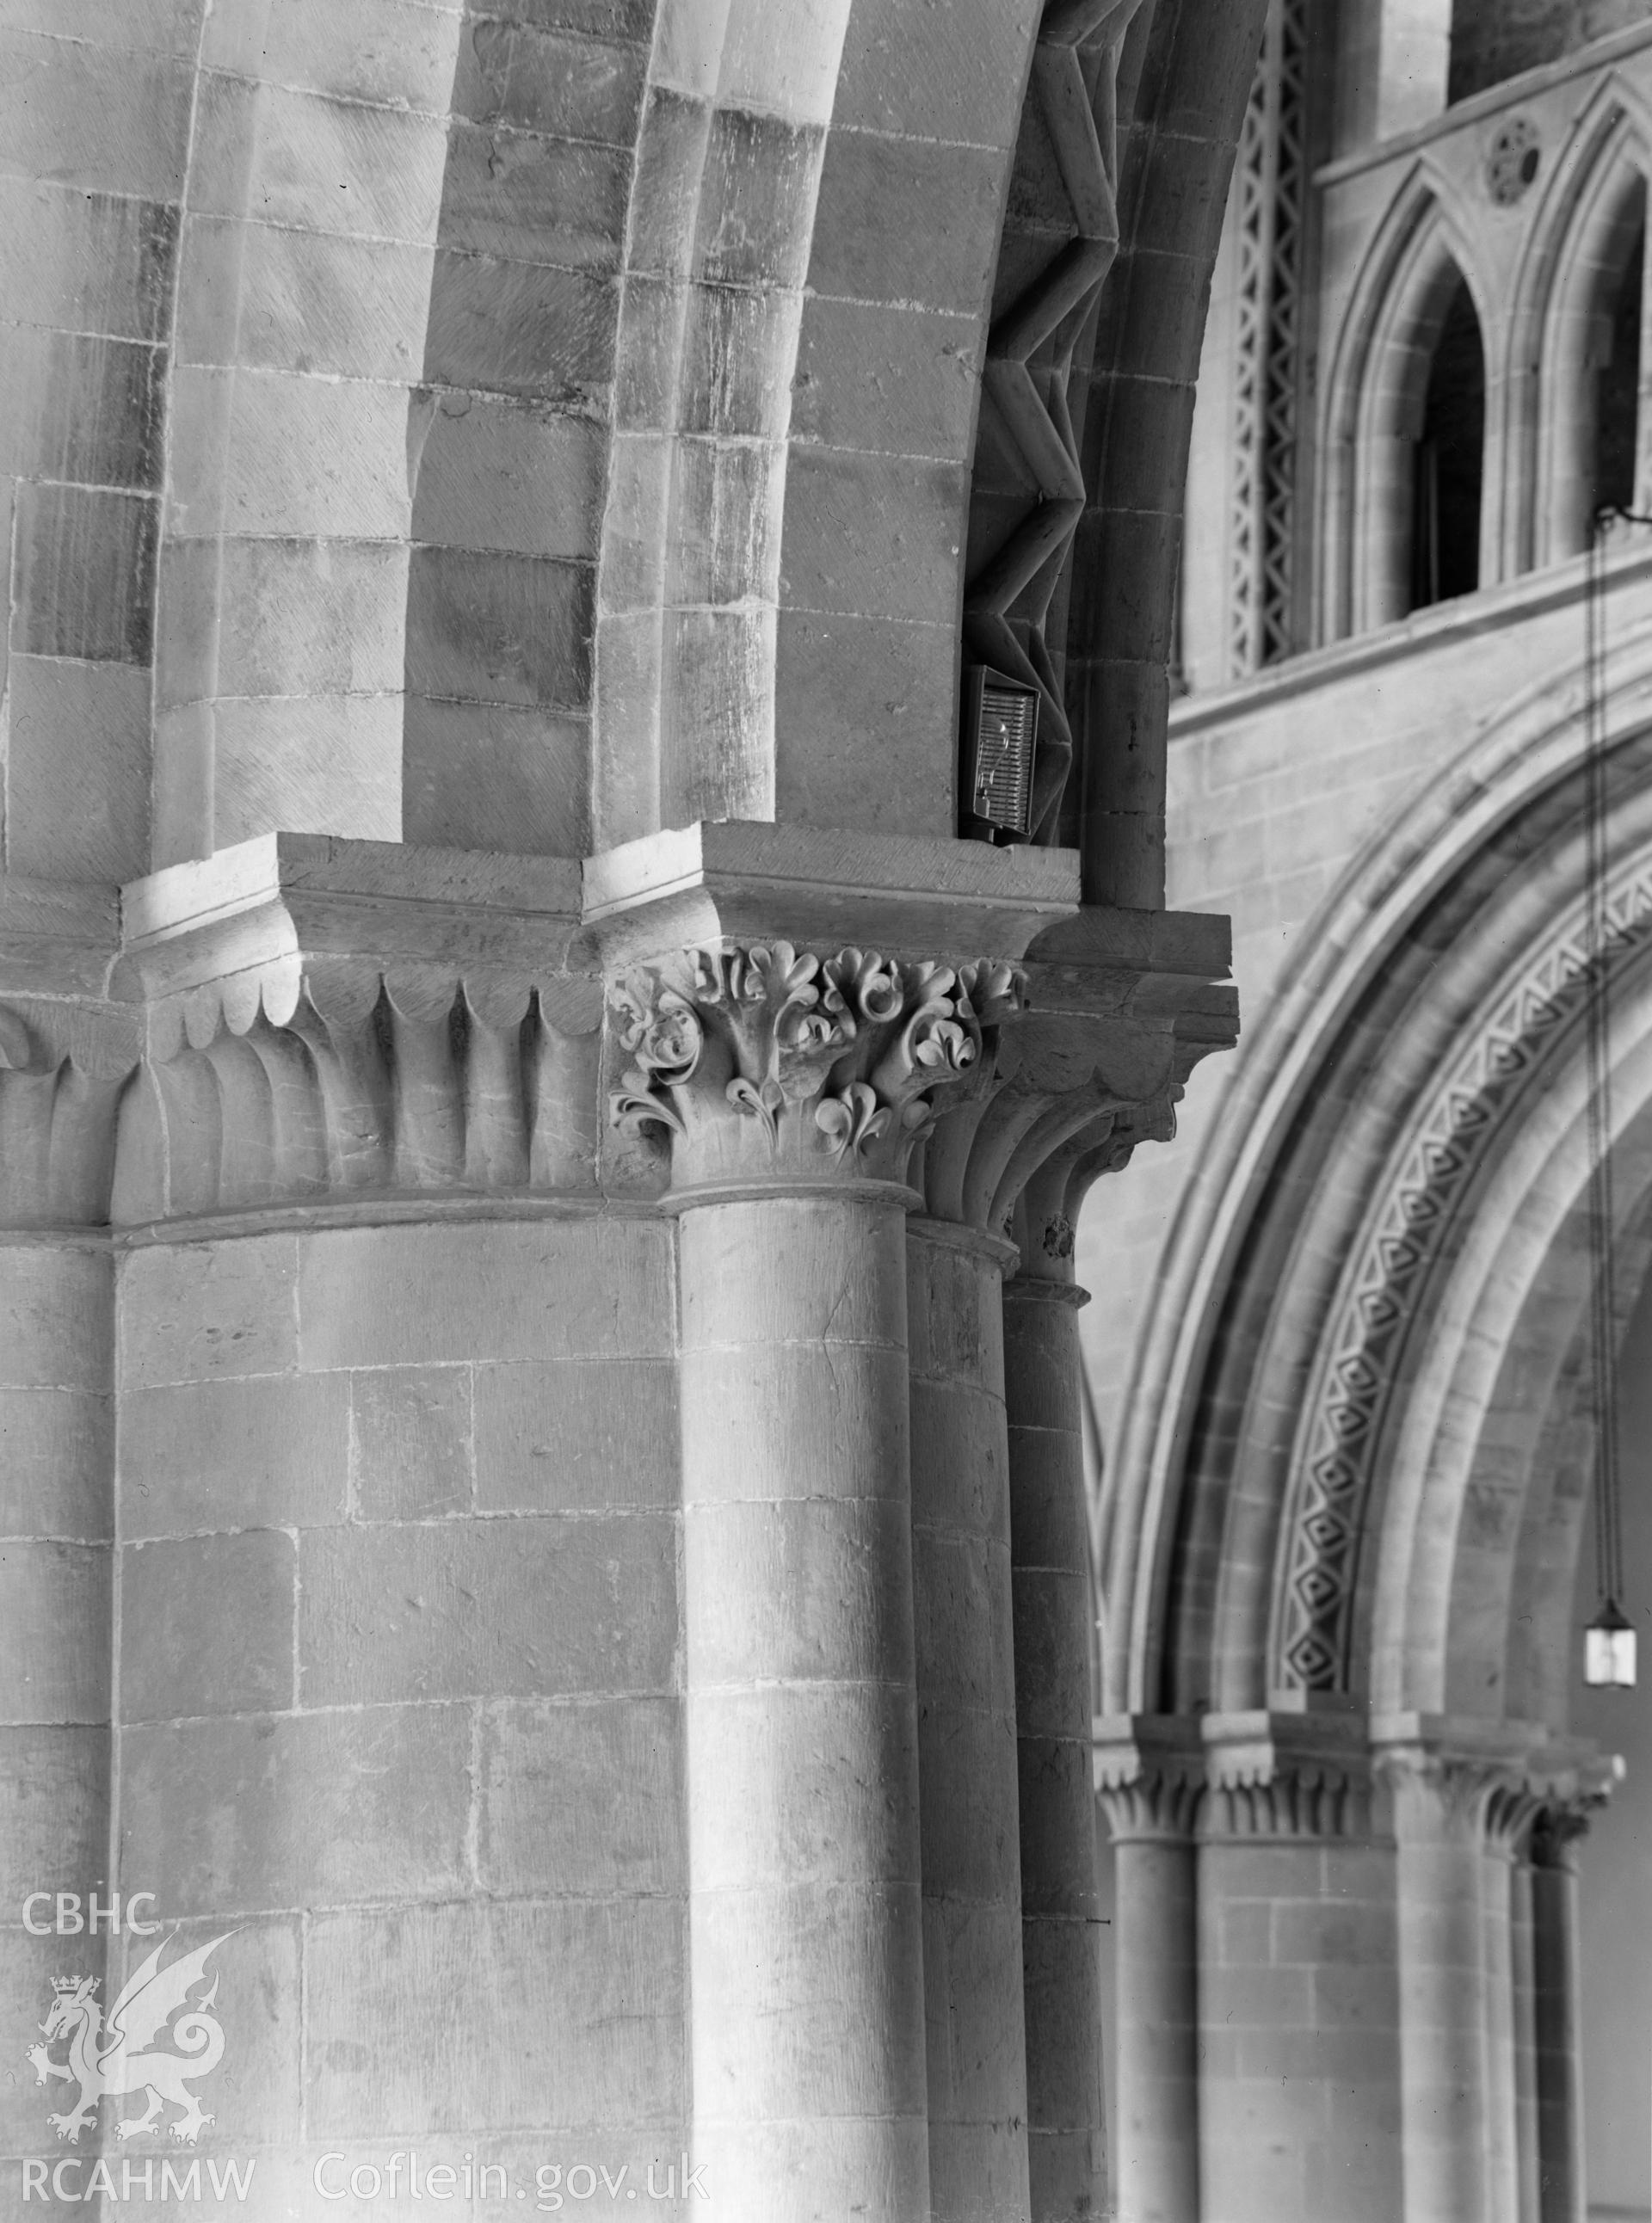 Digital copy of a black and white nitrate negative showing view of capital and arch at St. David's Cathedral, taken by E.W. Lovegrove, July 1936.